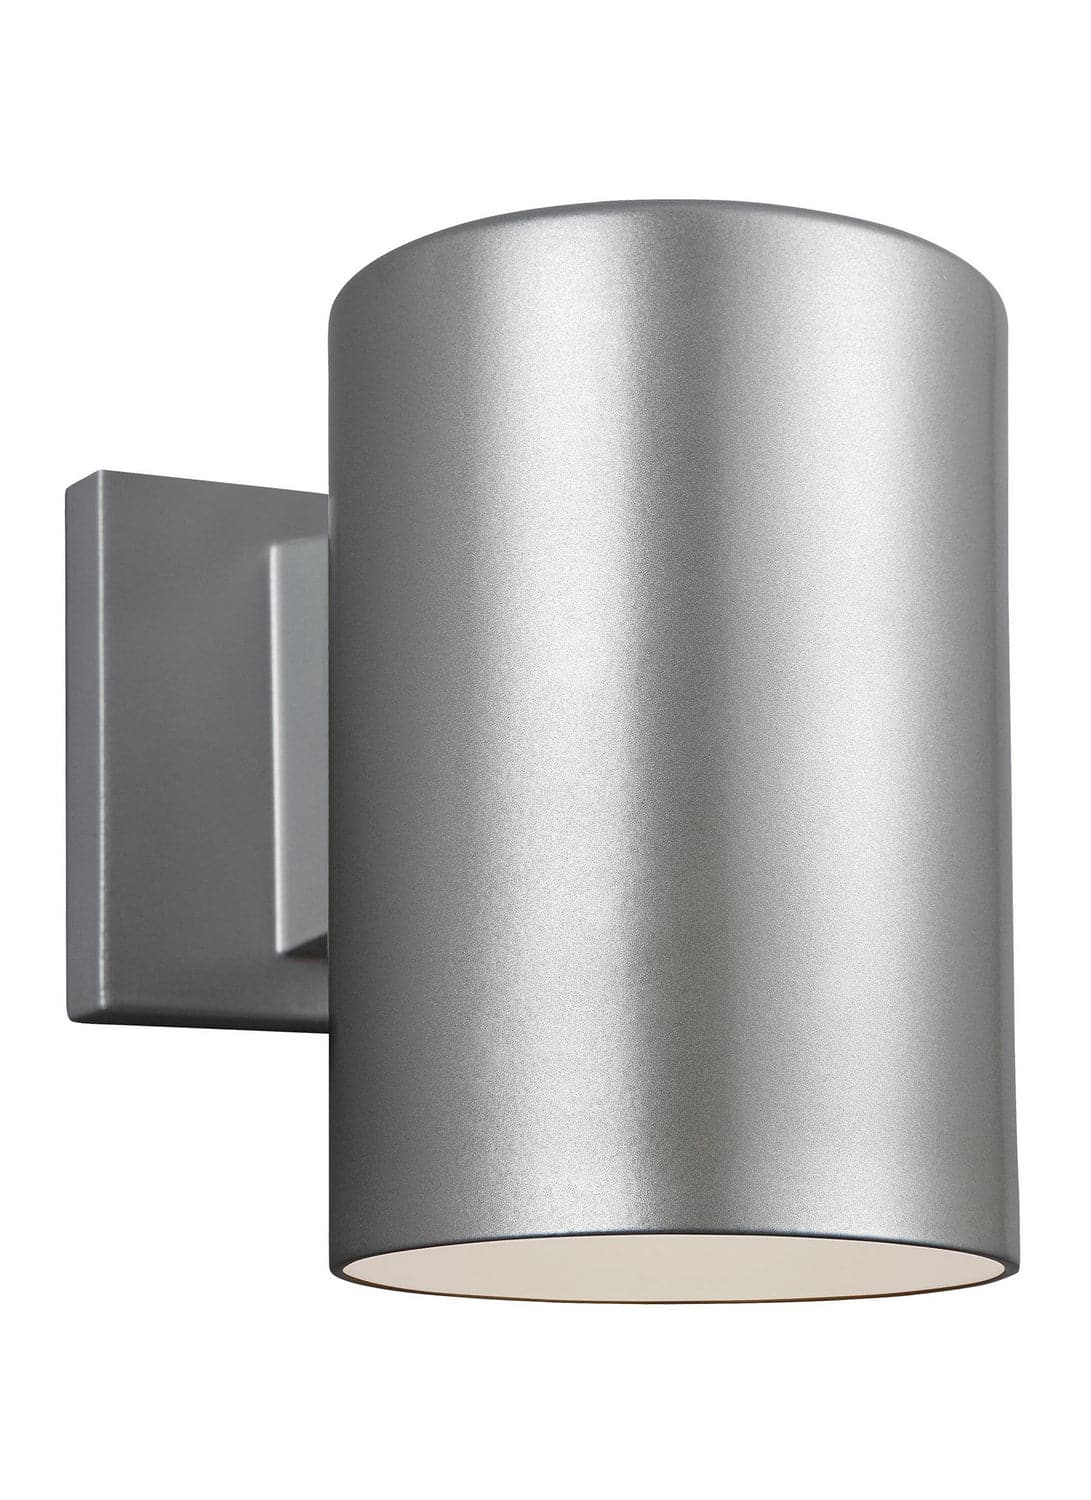 Visual Comfort Studio - 8313801-753/T - One Light Outdoor Wall Lantern - Outdoor Cylinders - Painted Brushed Nickel